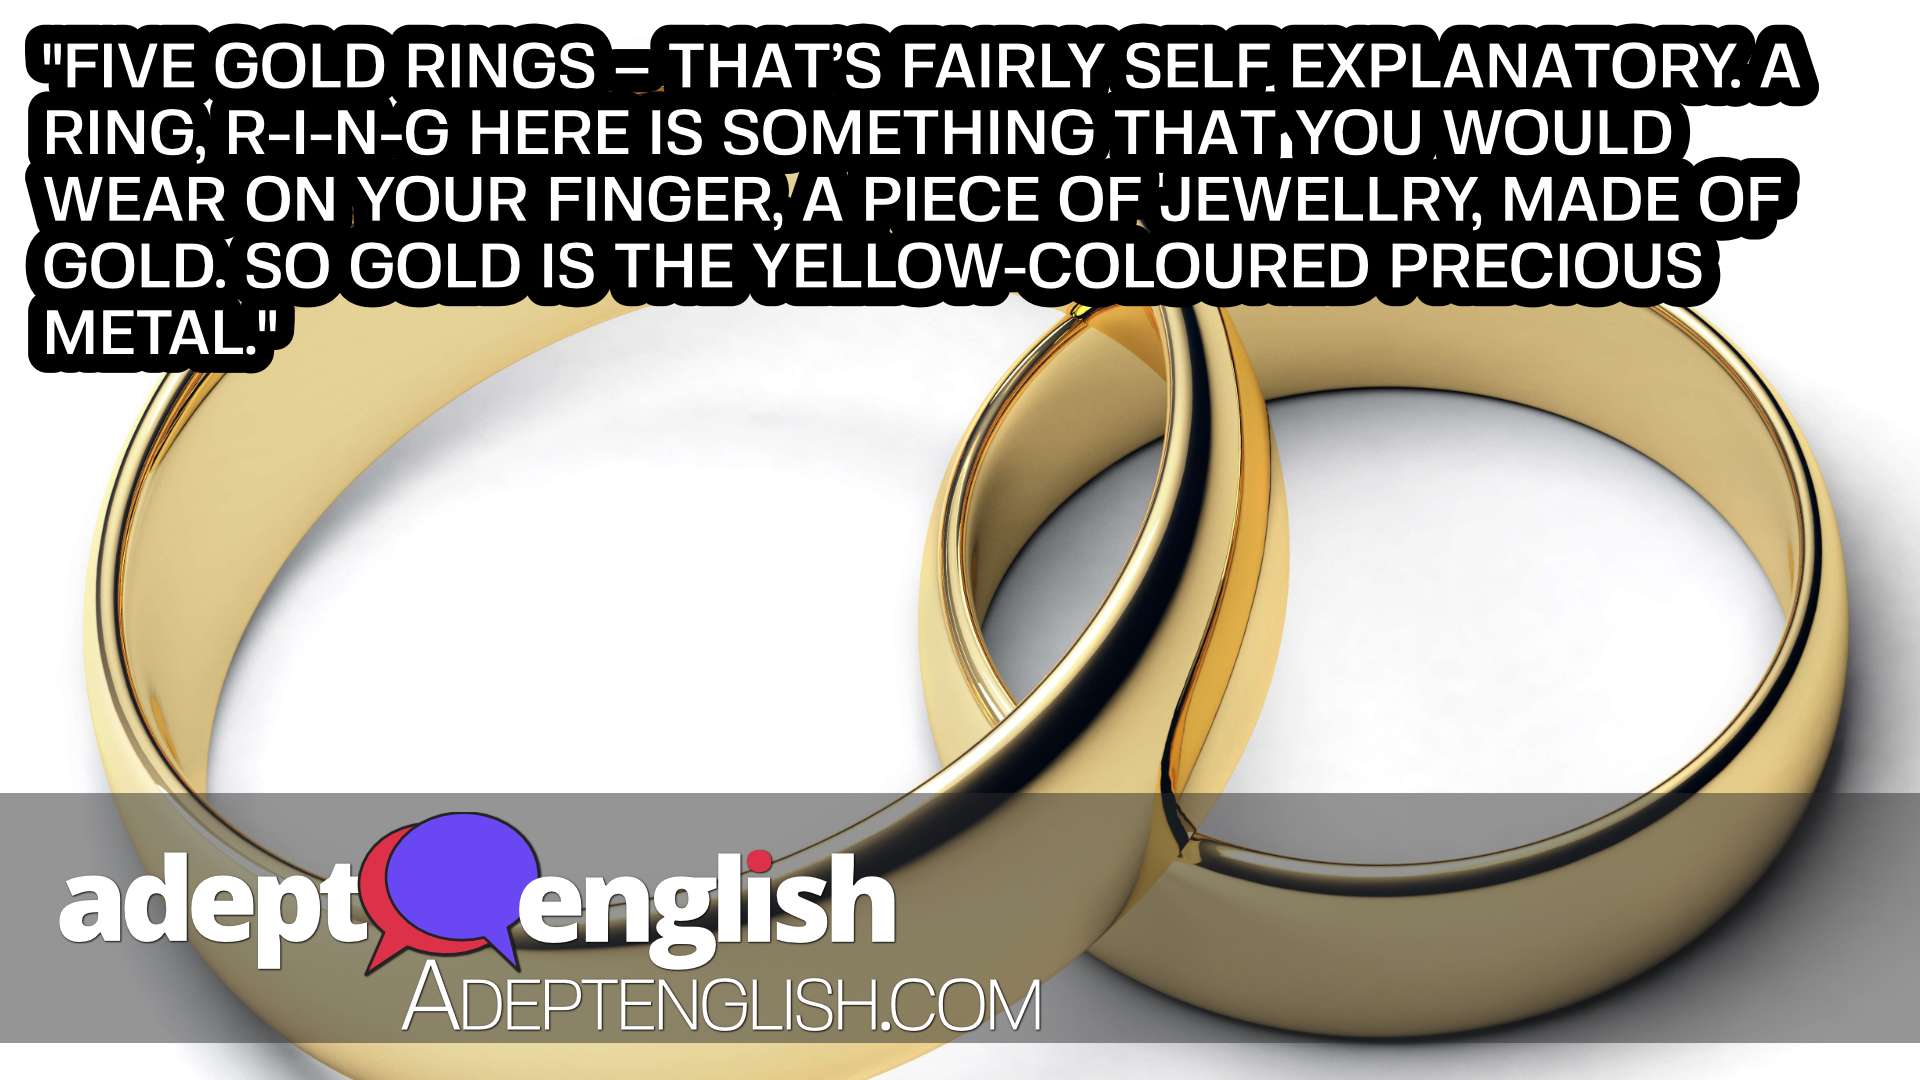 A photograph of two golden rings, used to help describe the 5 golden ring verse in the 12 days of Christmas English lesson.